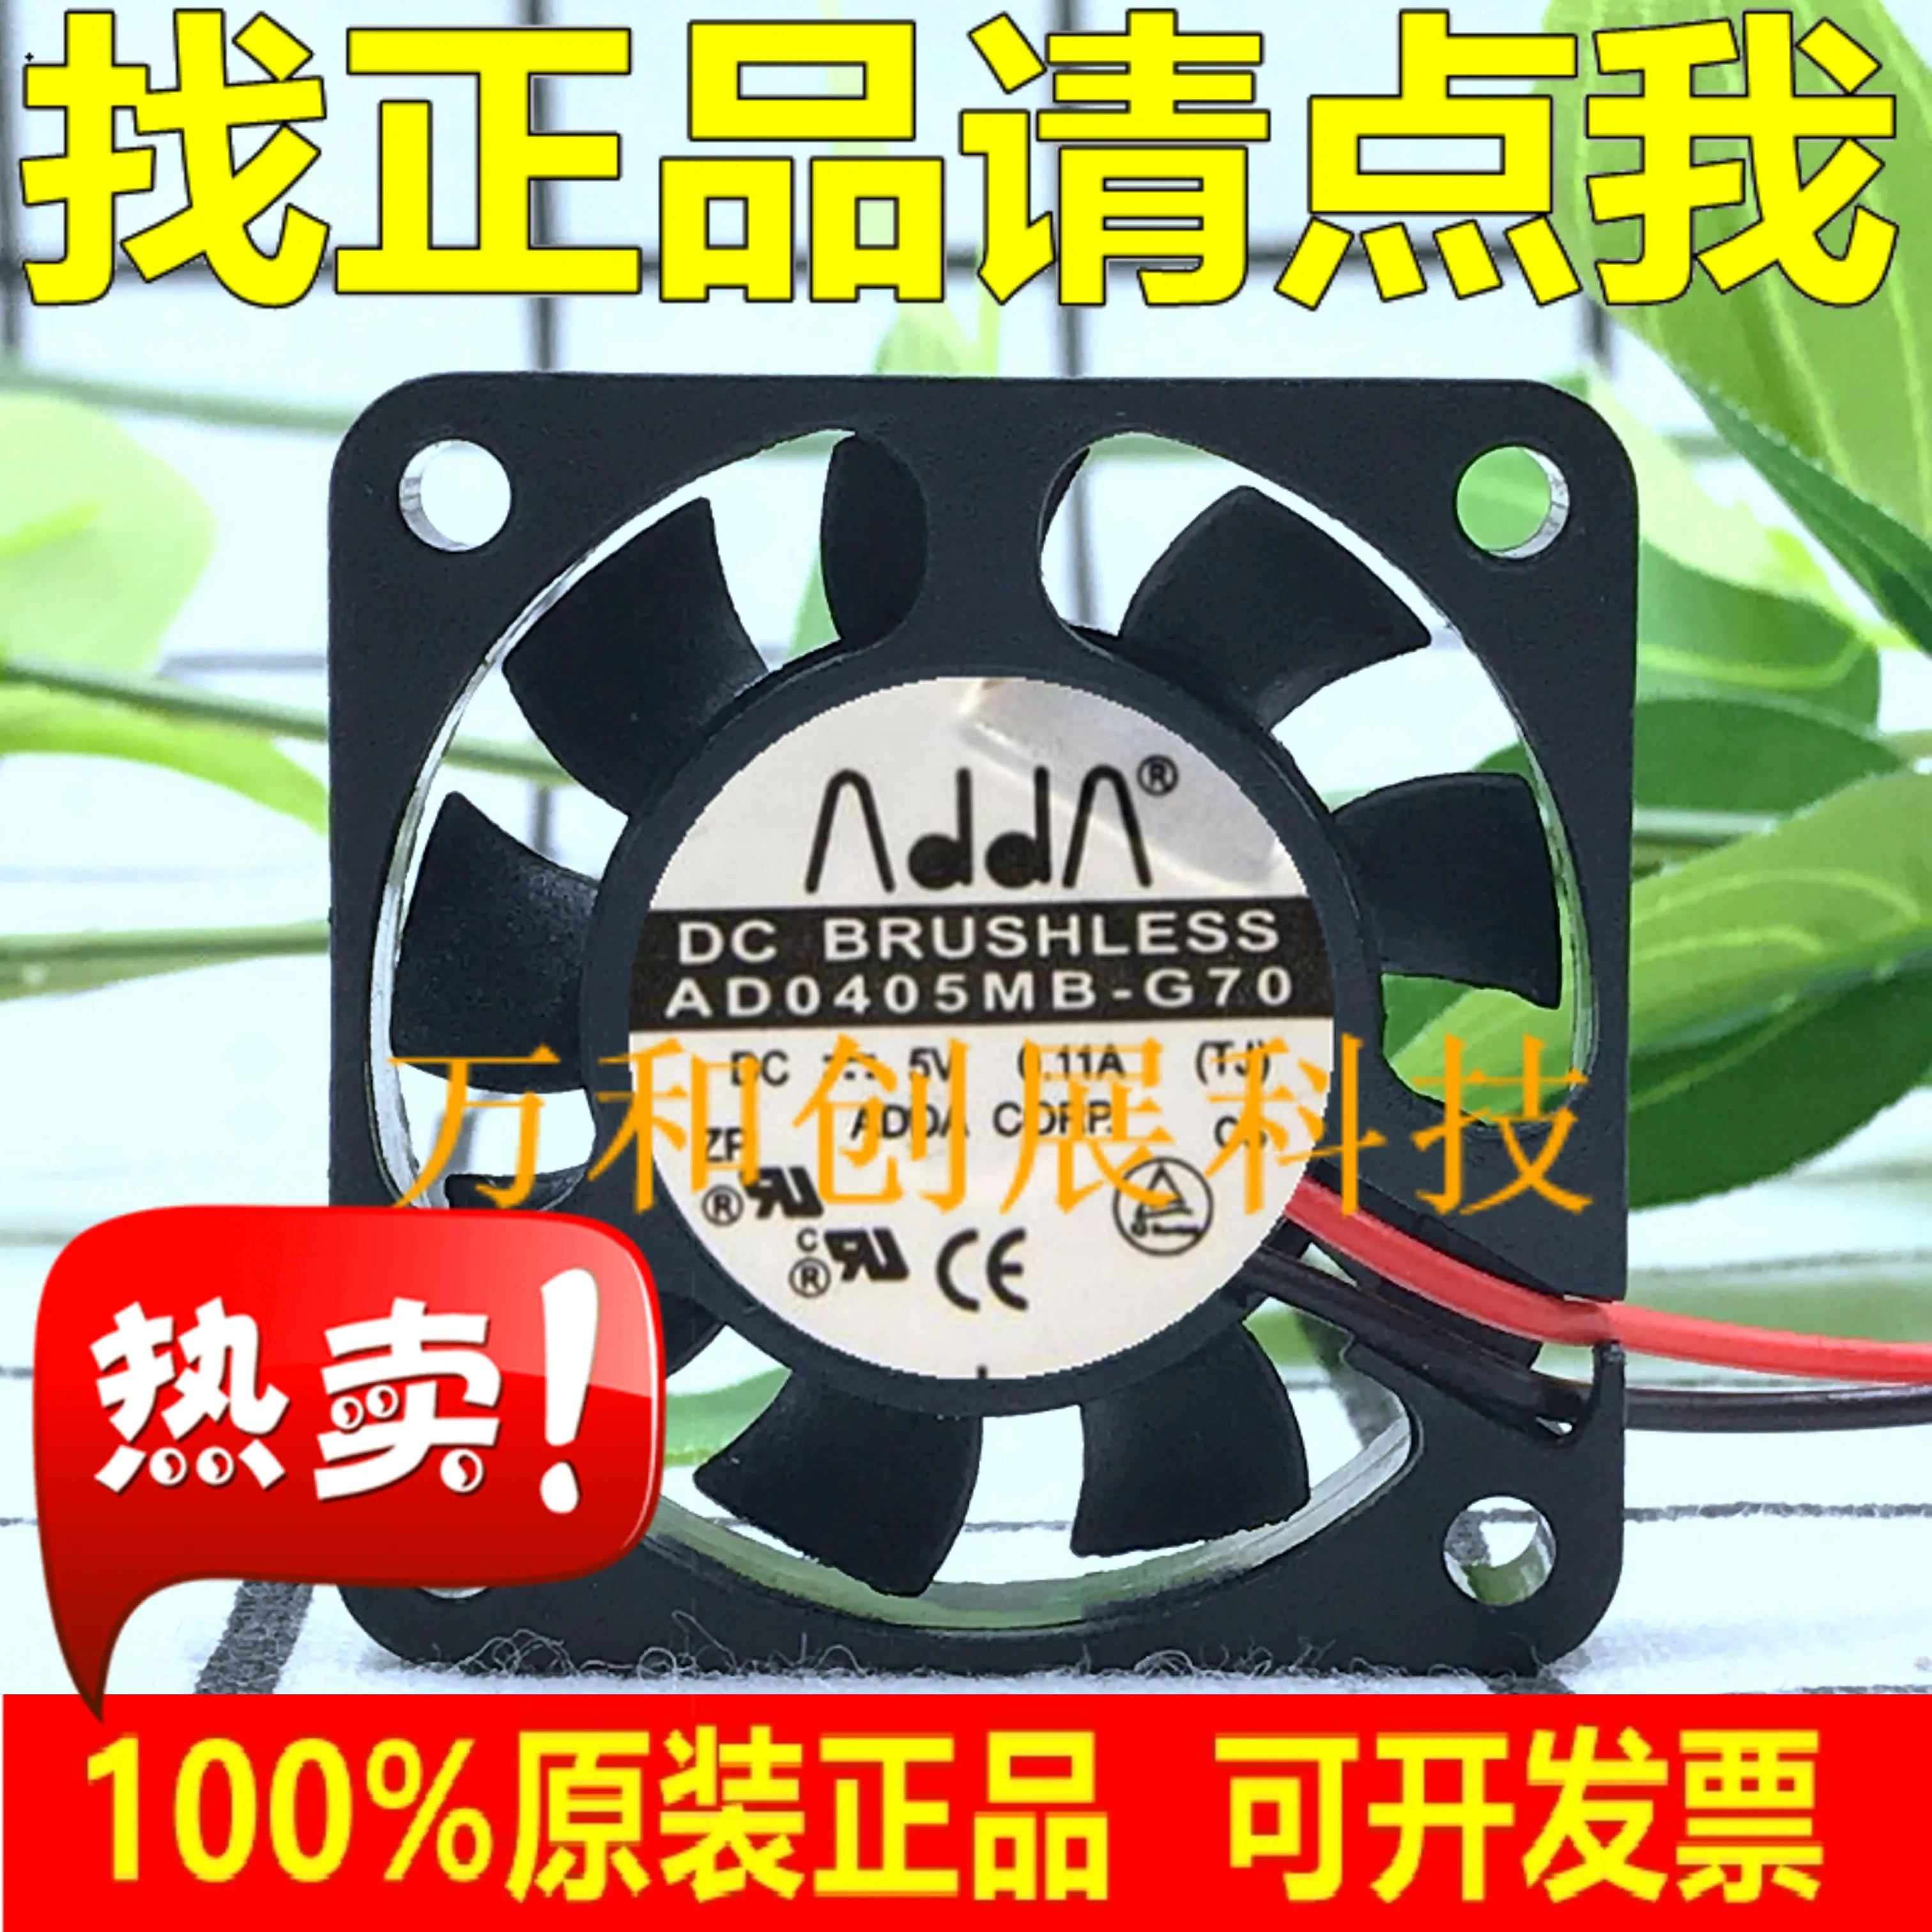 

Freeshipping ADDA AD0405MB-G70 5V 0.11A 4CM 4010 mute double ball cooling fan 2 line